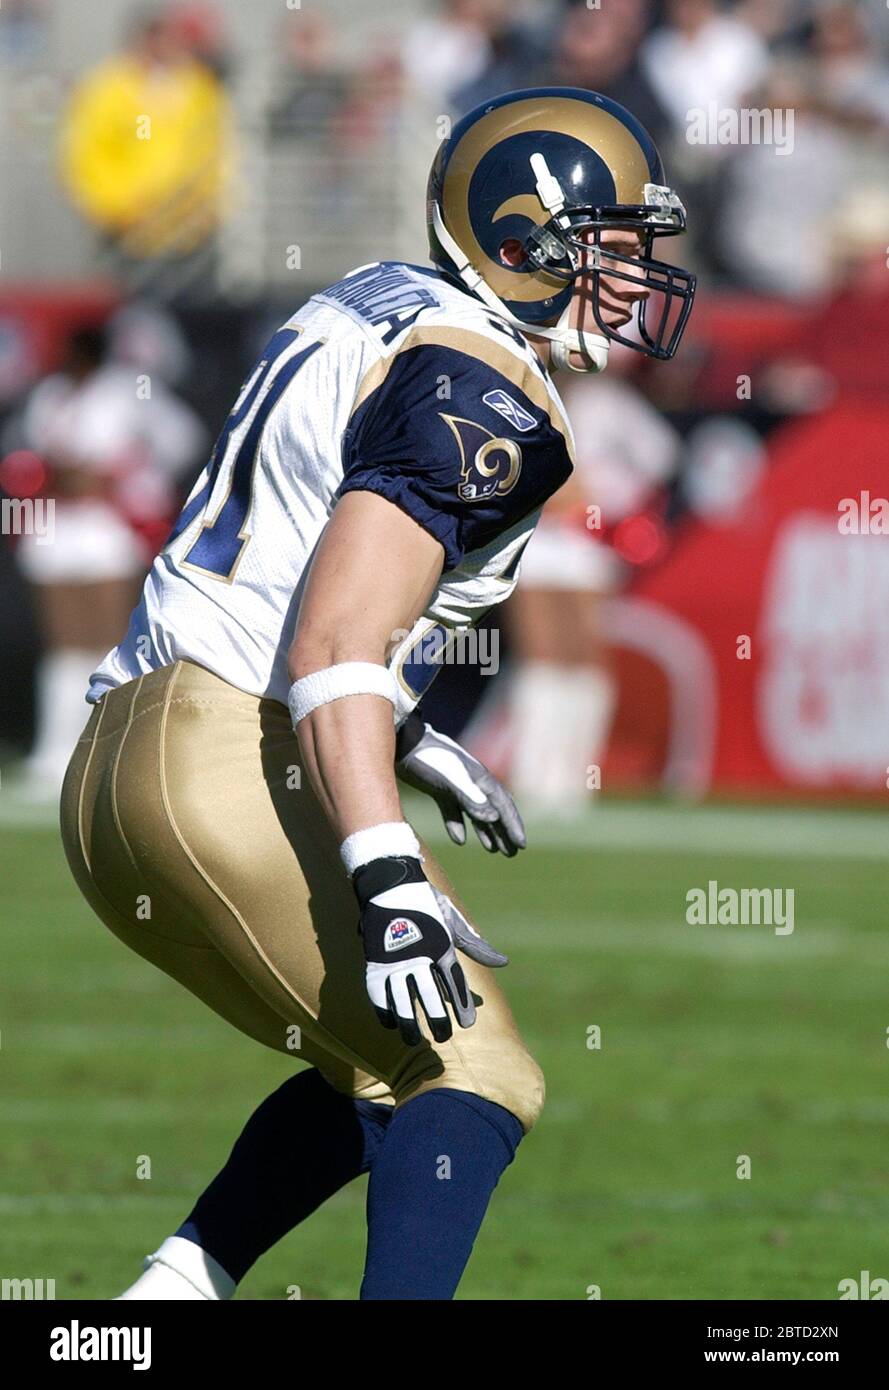 Tempe, United States. 23rd Nov, 2003. St. Louis Rams safety Adam Archuleta  against the Arizona Cardinals. The Rams defeated the Cardinals, 30-27, in  overtime at Sun Devil Stadium in Tempe, Ariz. on